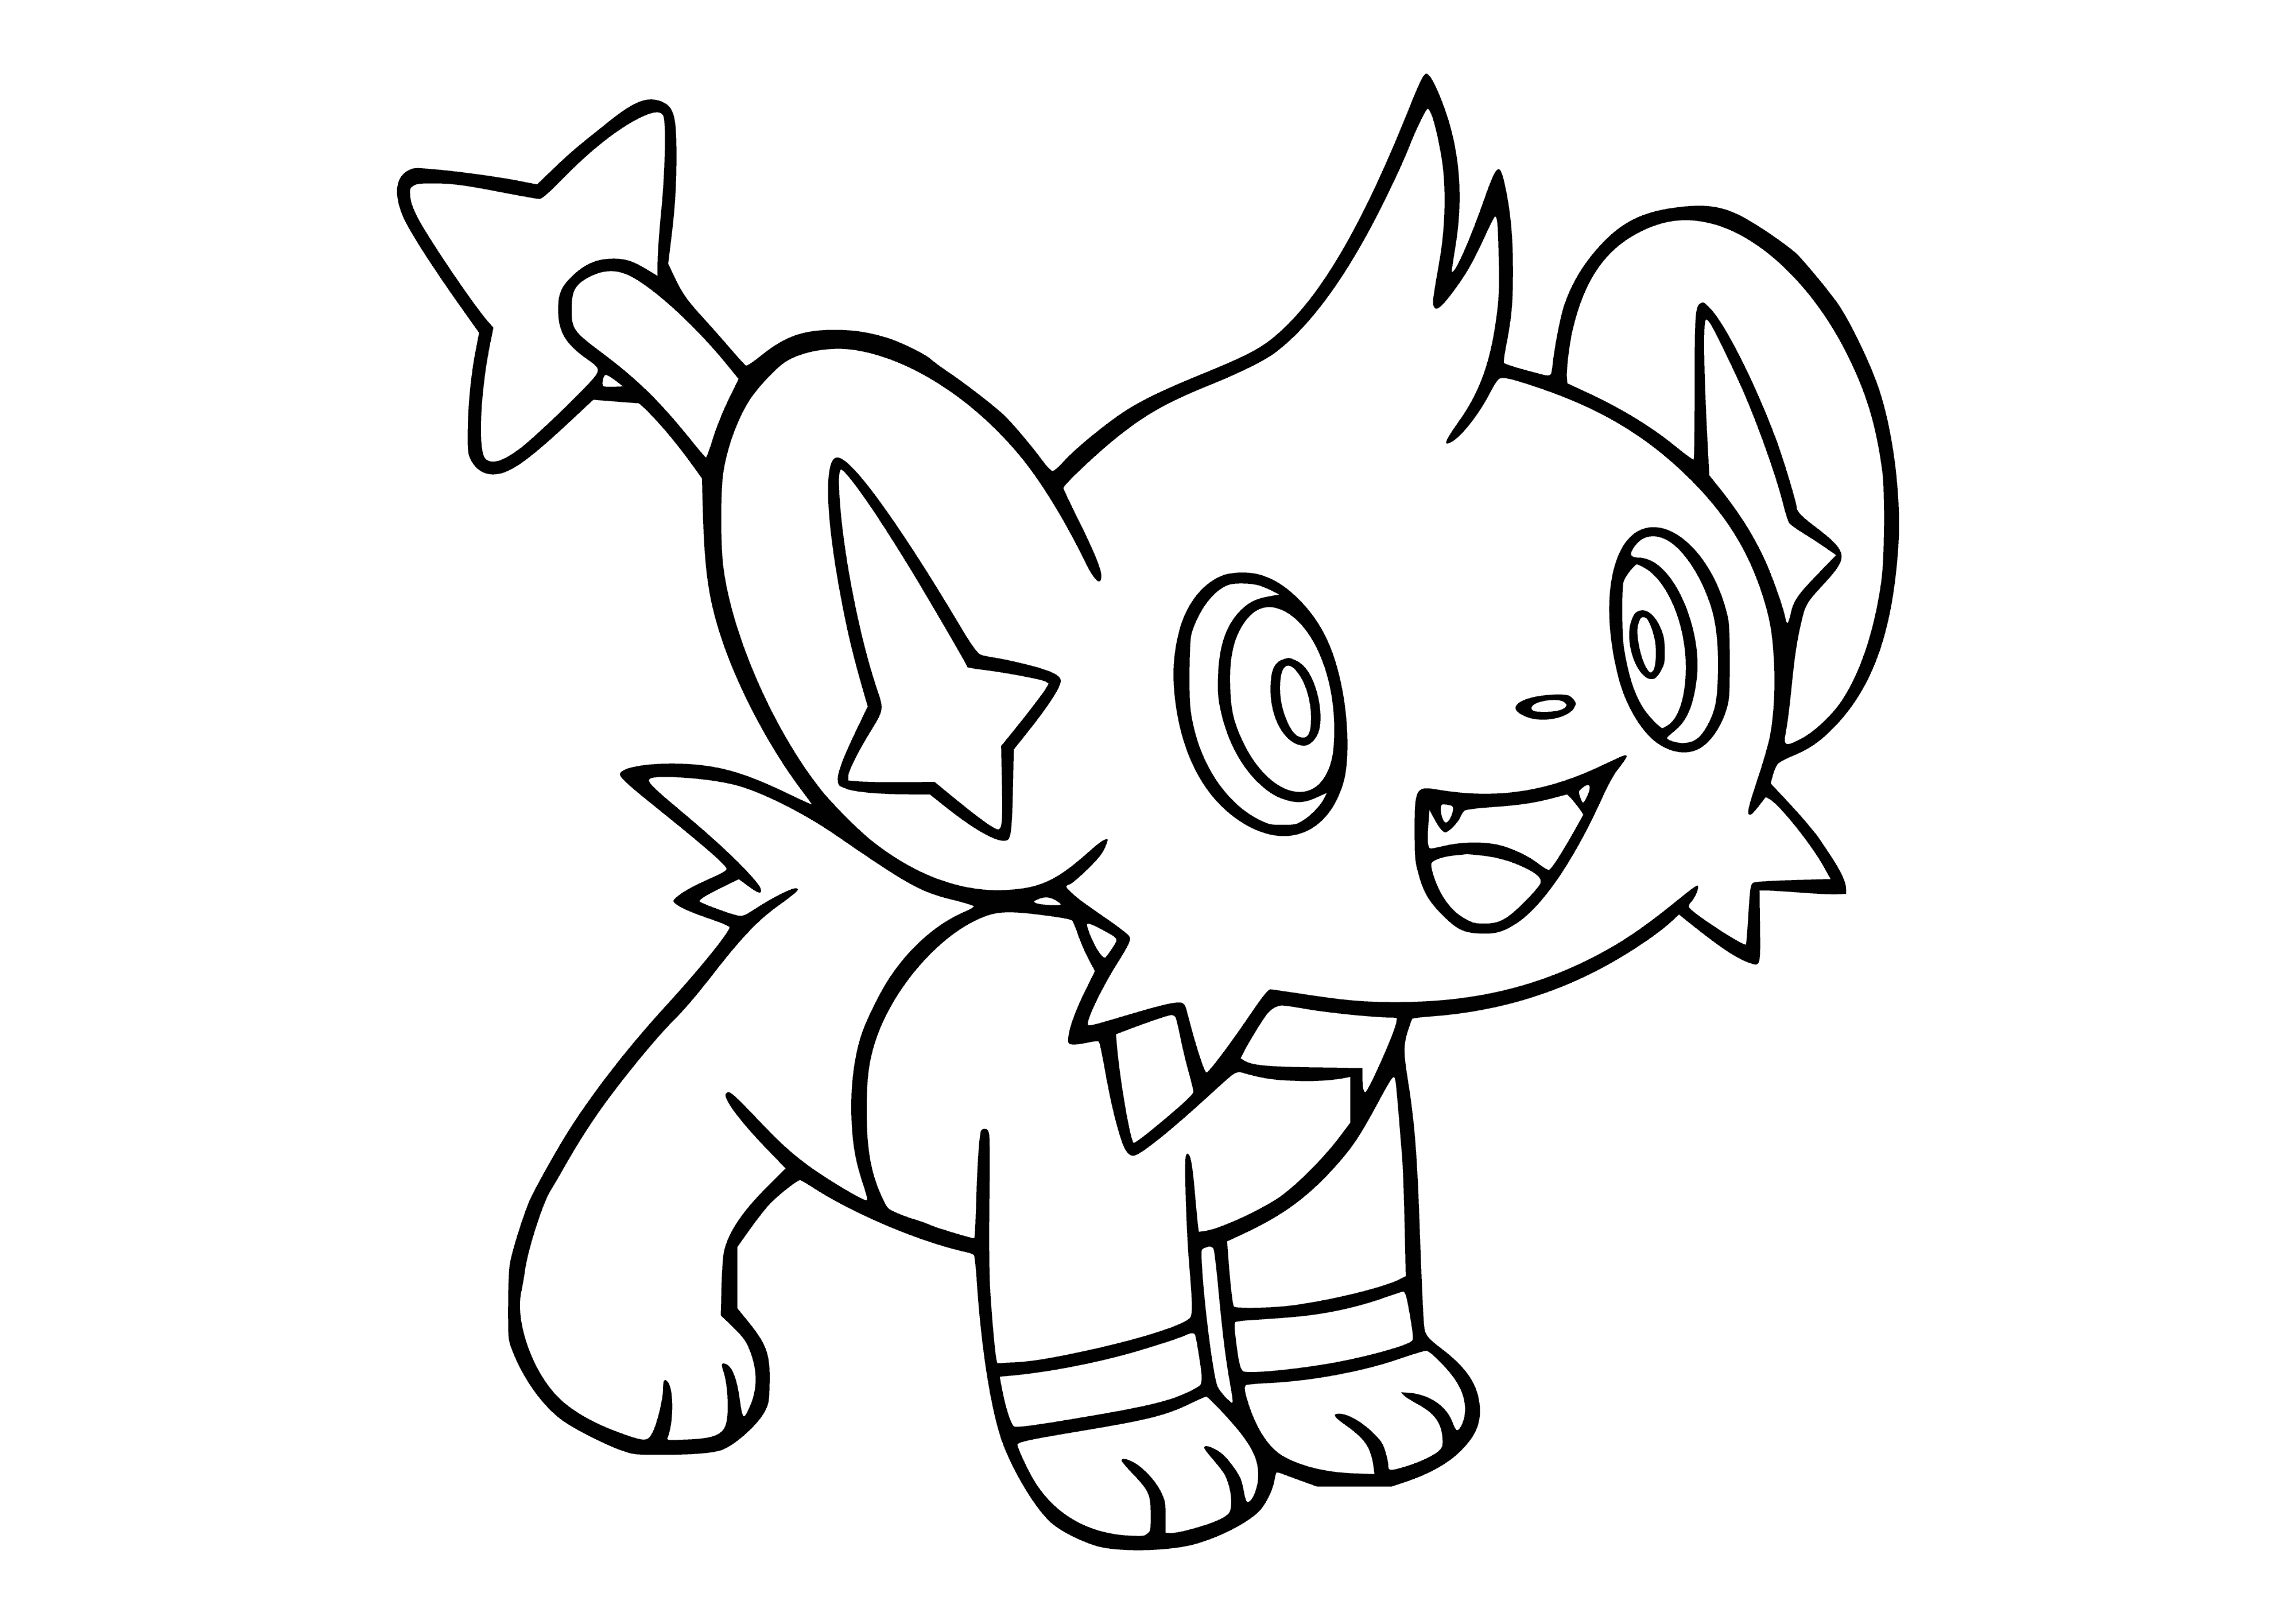 coloring page: Small, blue, rodent-like Pokemon w/ long tail, two horns, & black eyes. Evolves into Luxio at lvl 15.